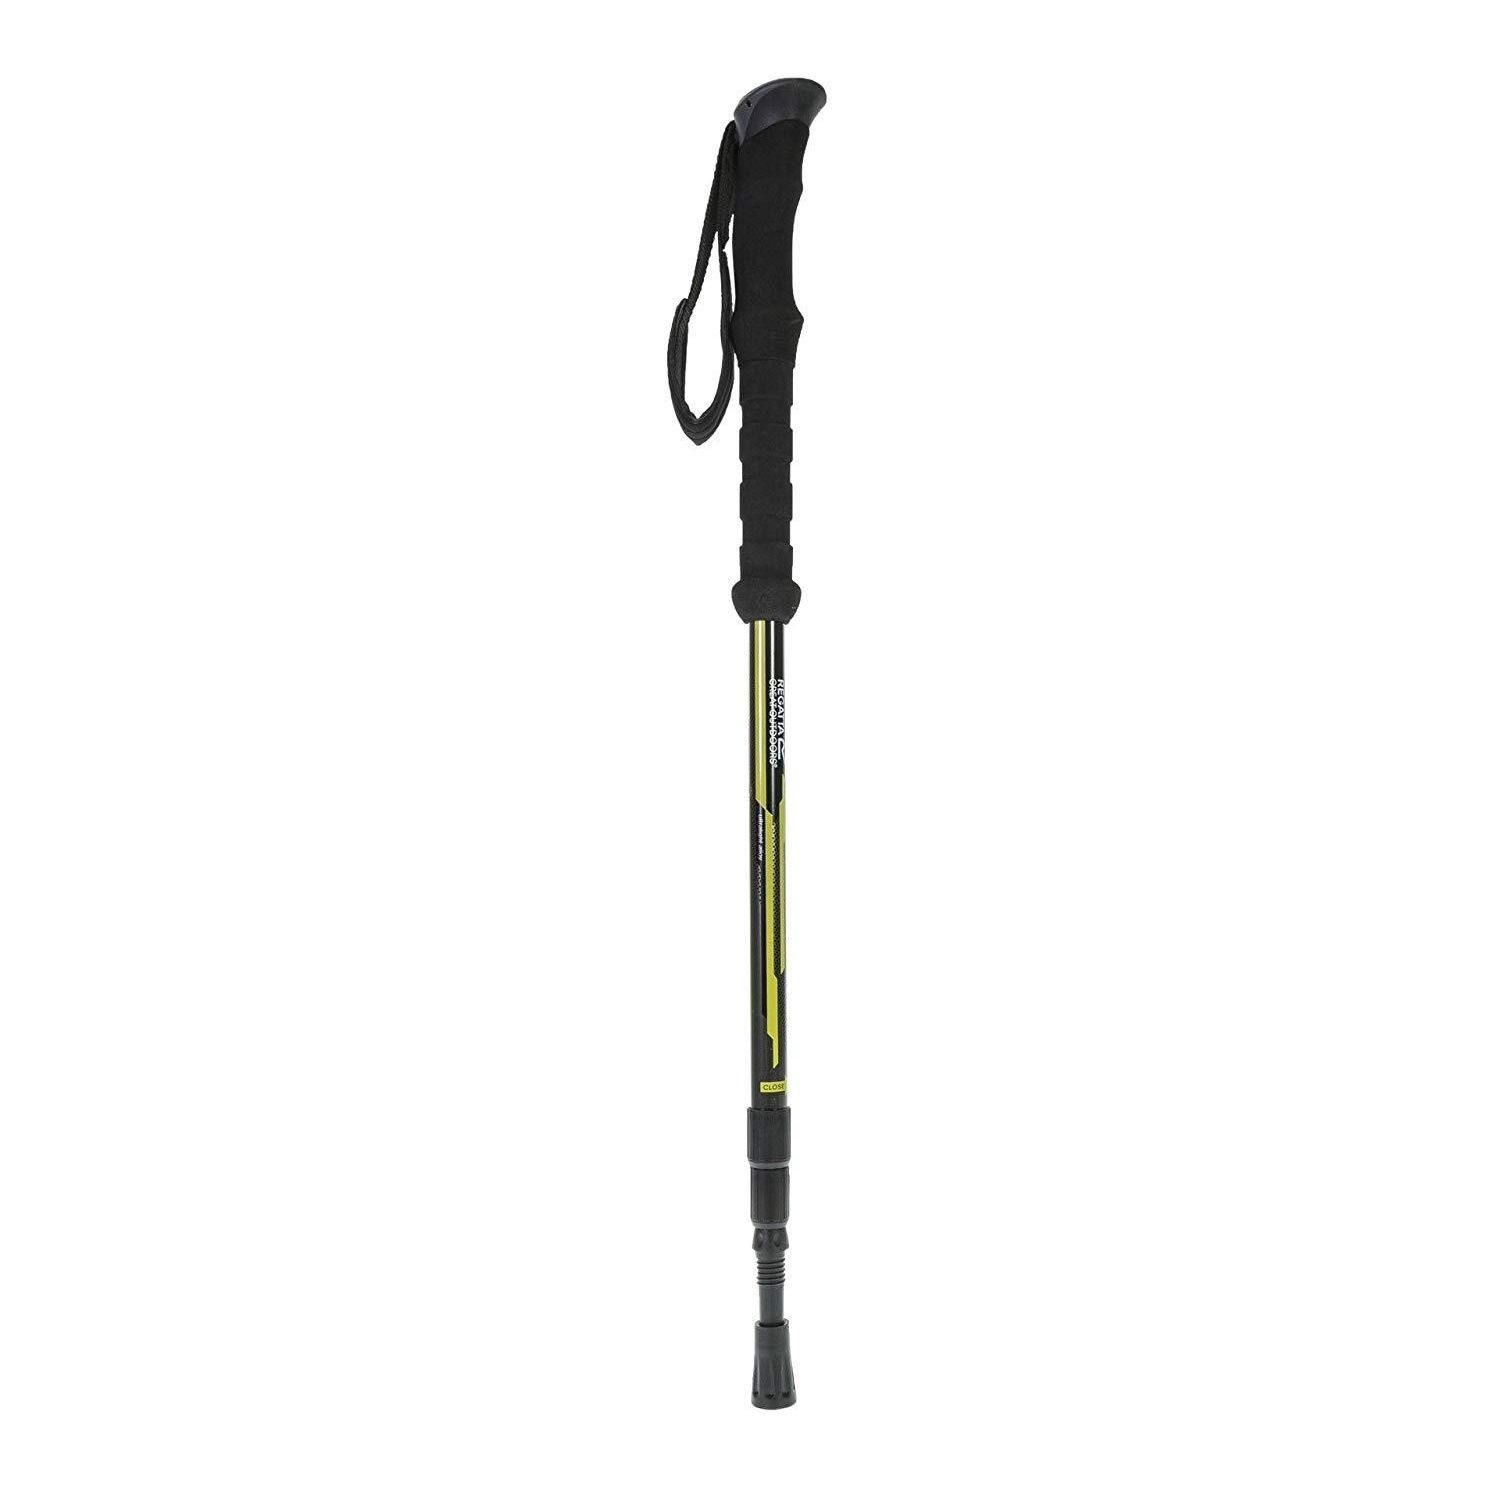 Lightweight aluminium tubing. Telescopic height adjustment. Moulded rubber grip handle. Adjustable wrist support. Anti shock absorber.